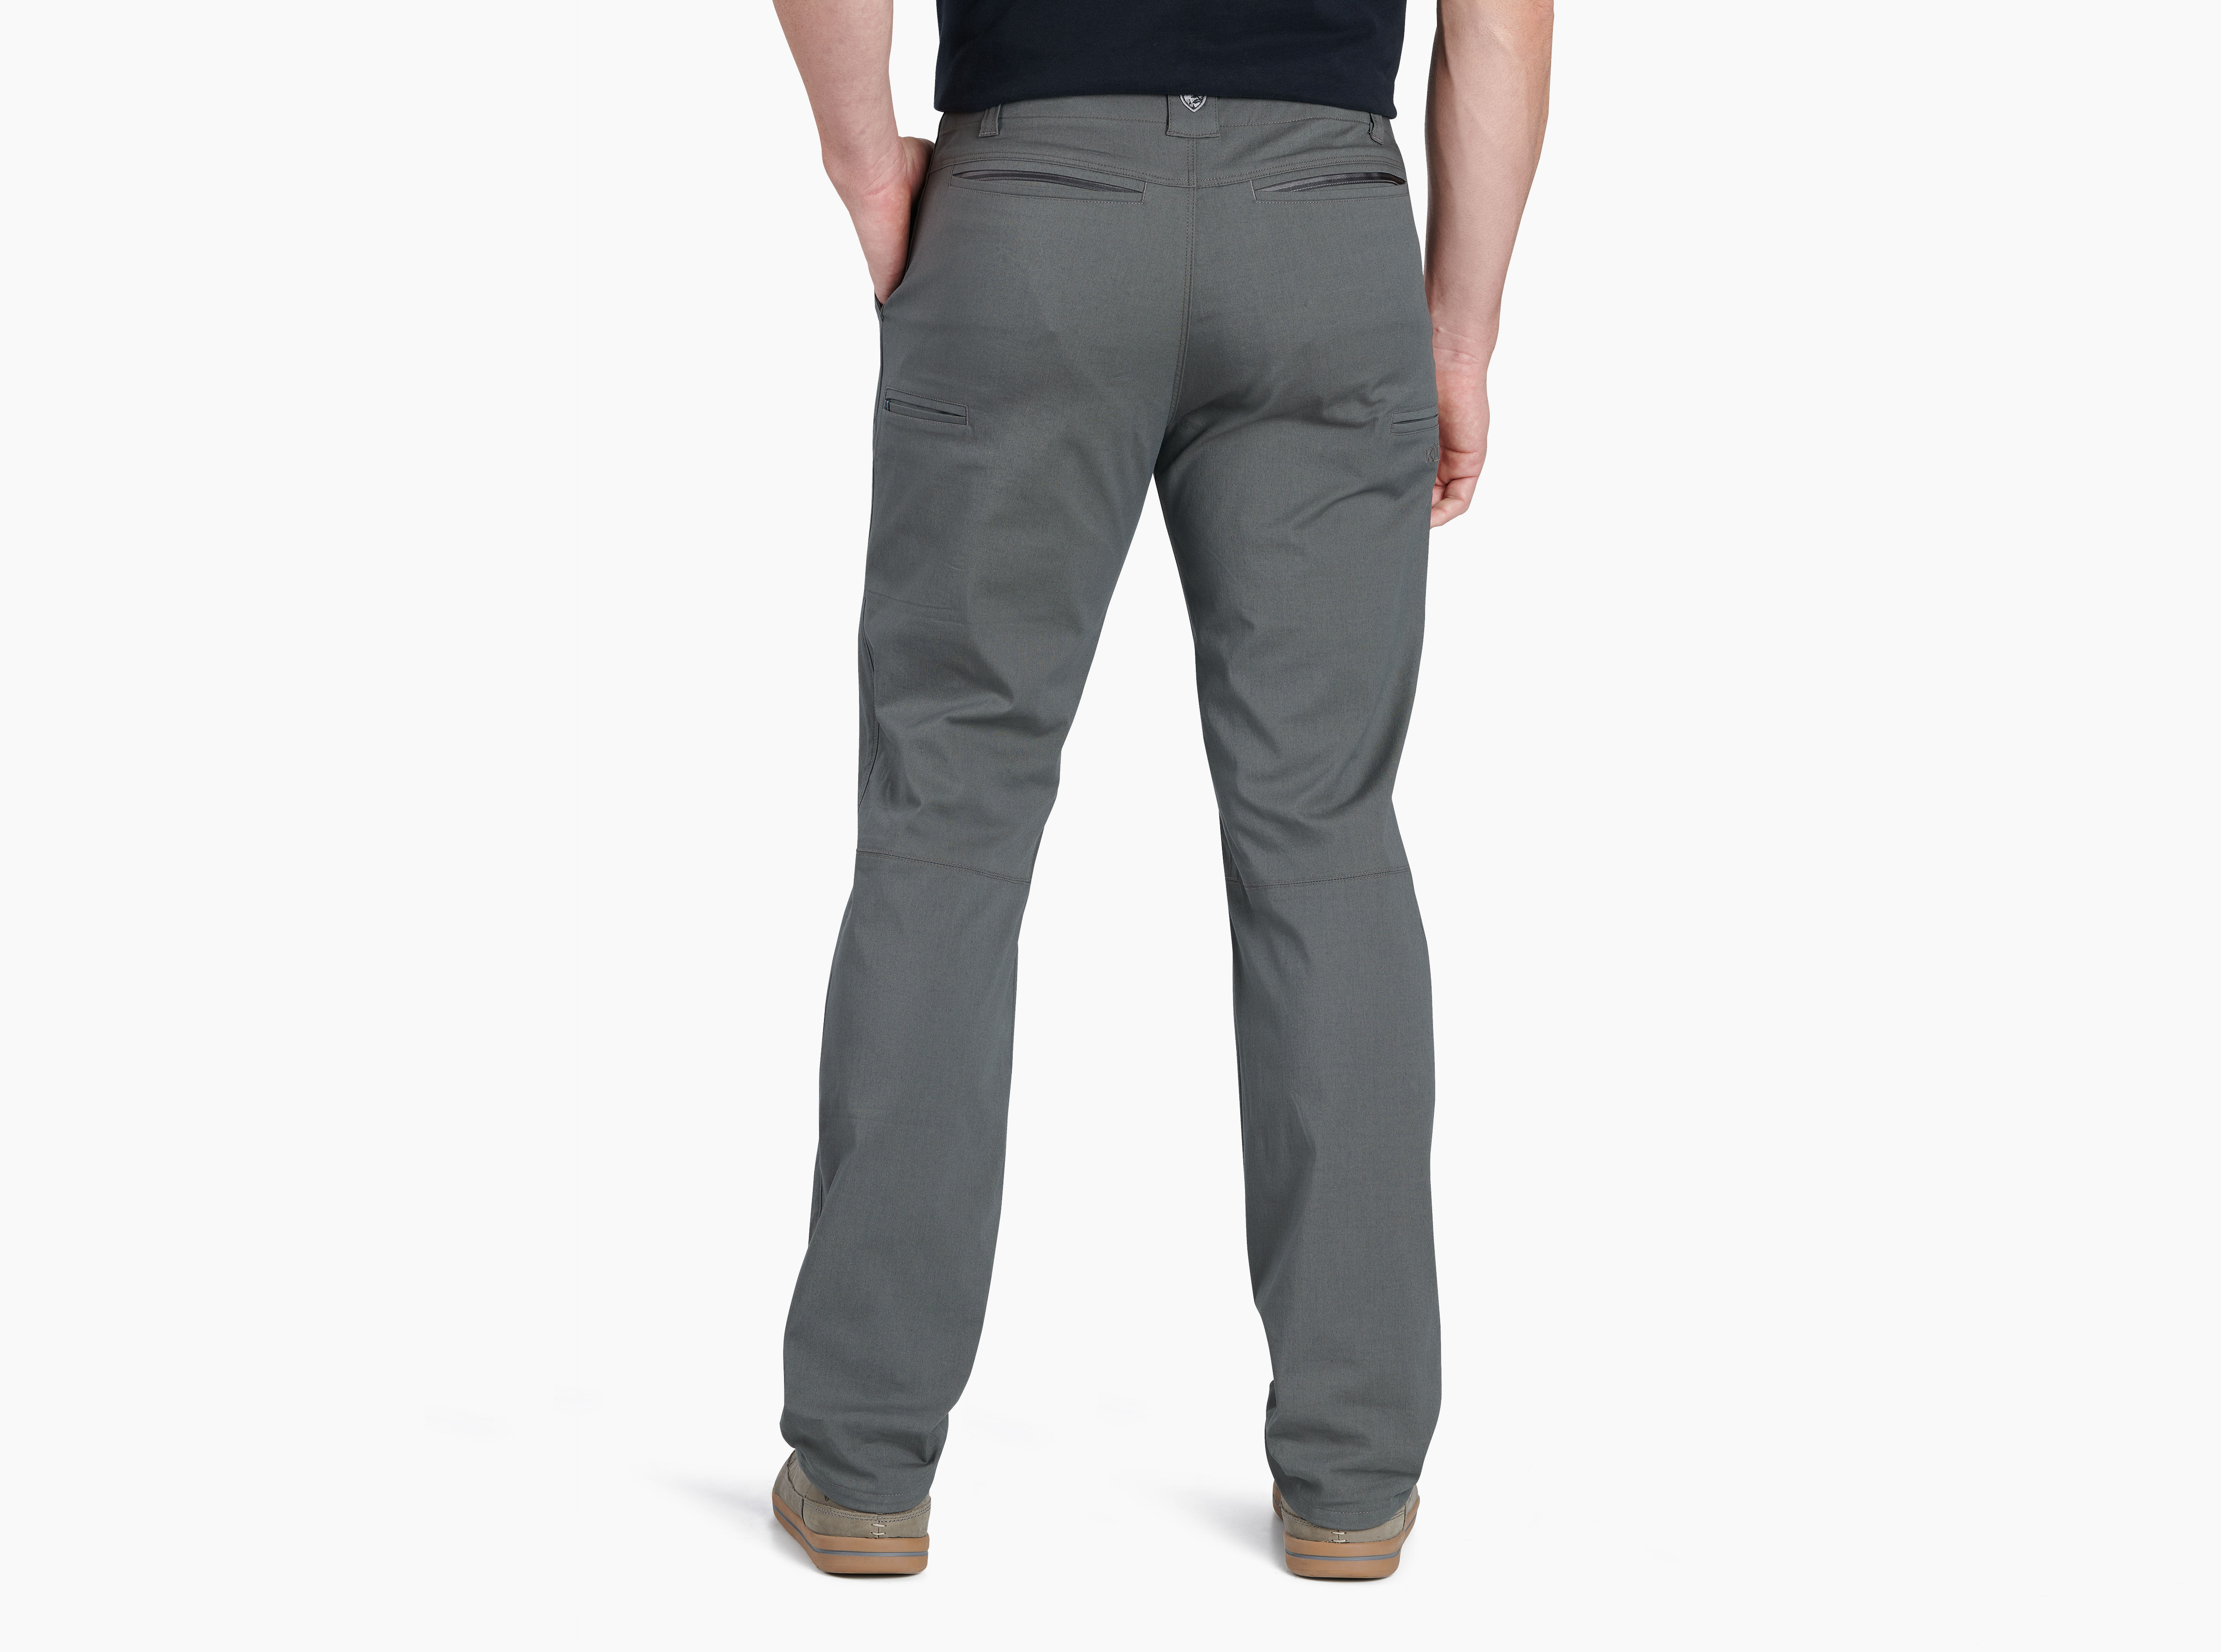 Are The Kühl Resistor Chino Pants The Best Stretchy Pants For Men? | The  Backpack Guide